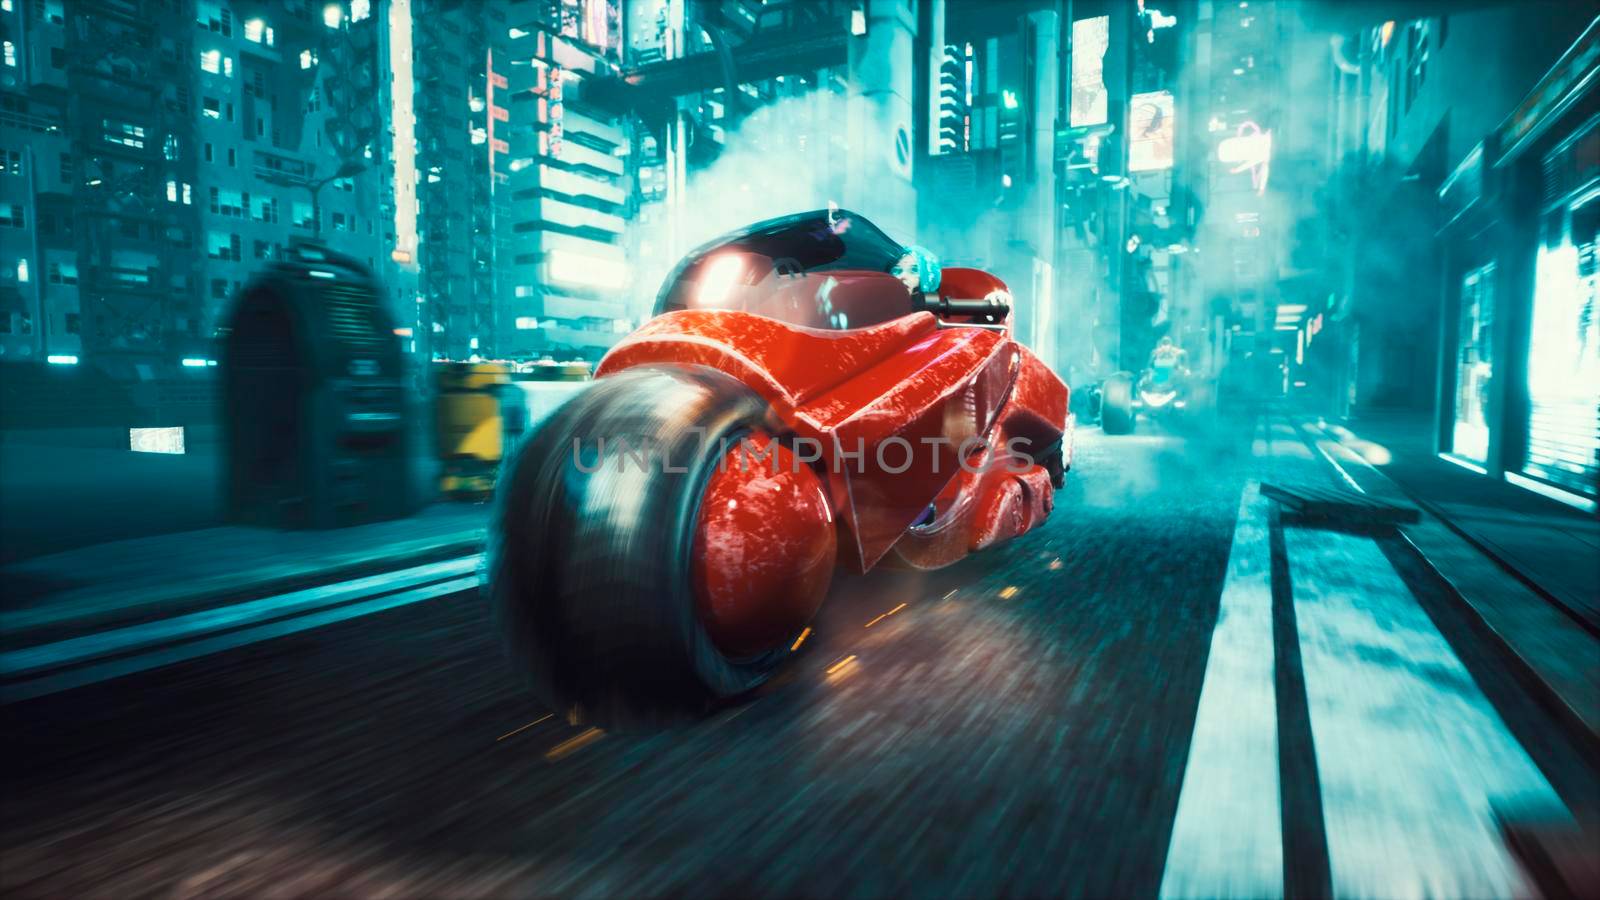 The girl from the cyber city at a huge speed rides futuristic motorcycle along the night street. View of an future fiction city. Post-apocalyptic cyber world concept.